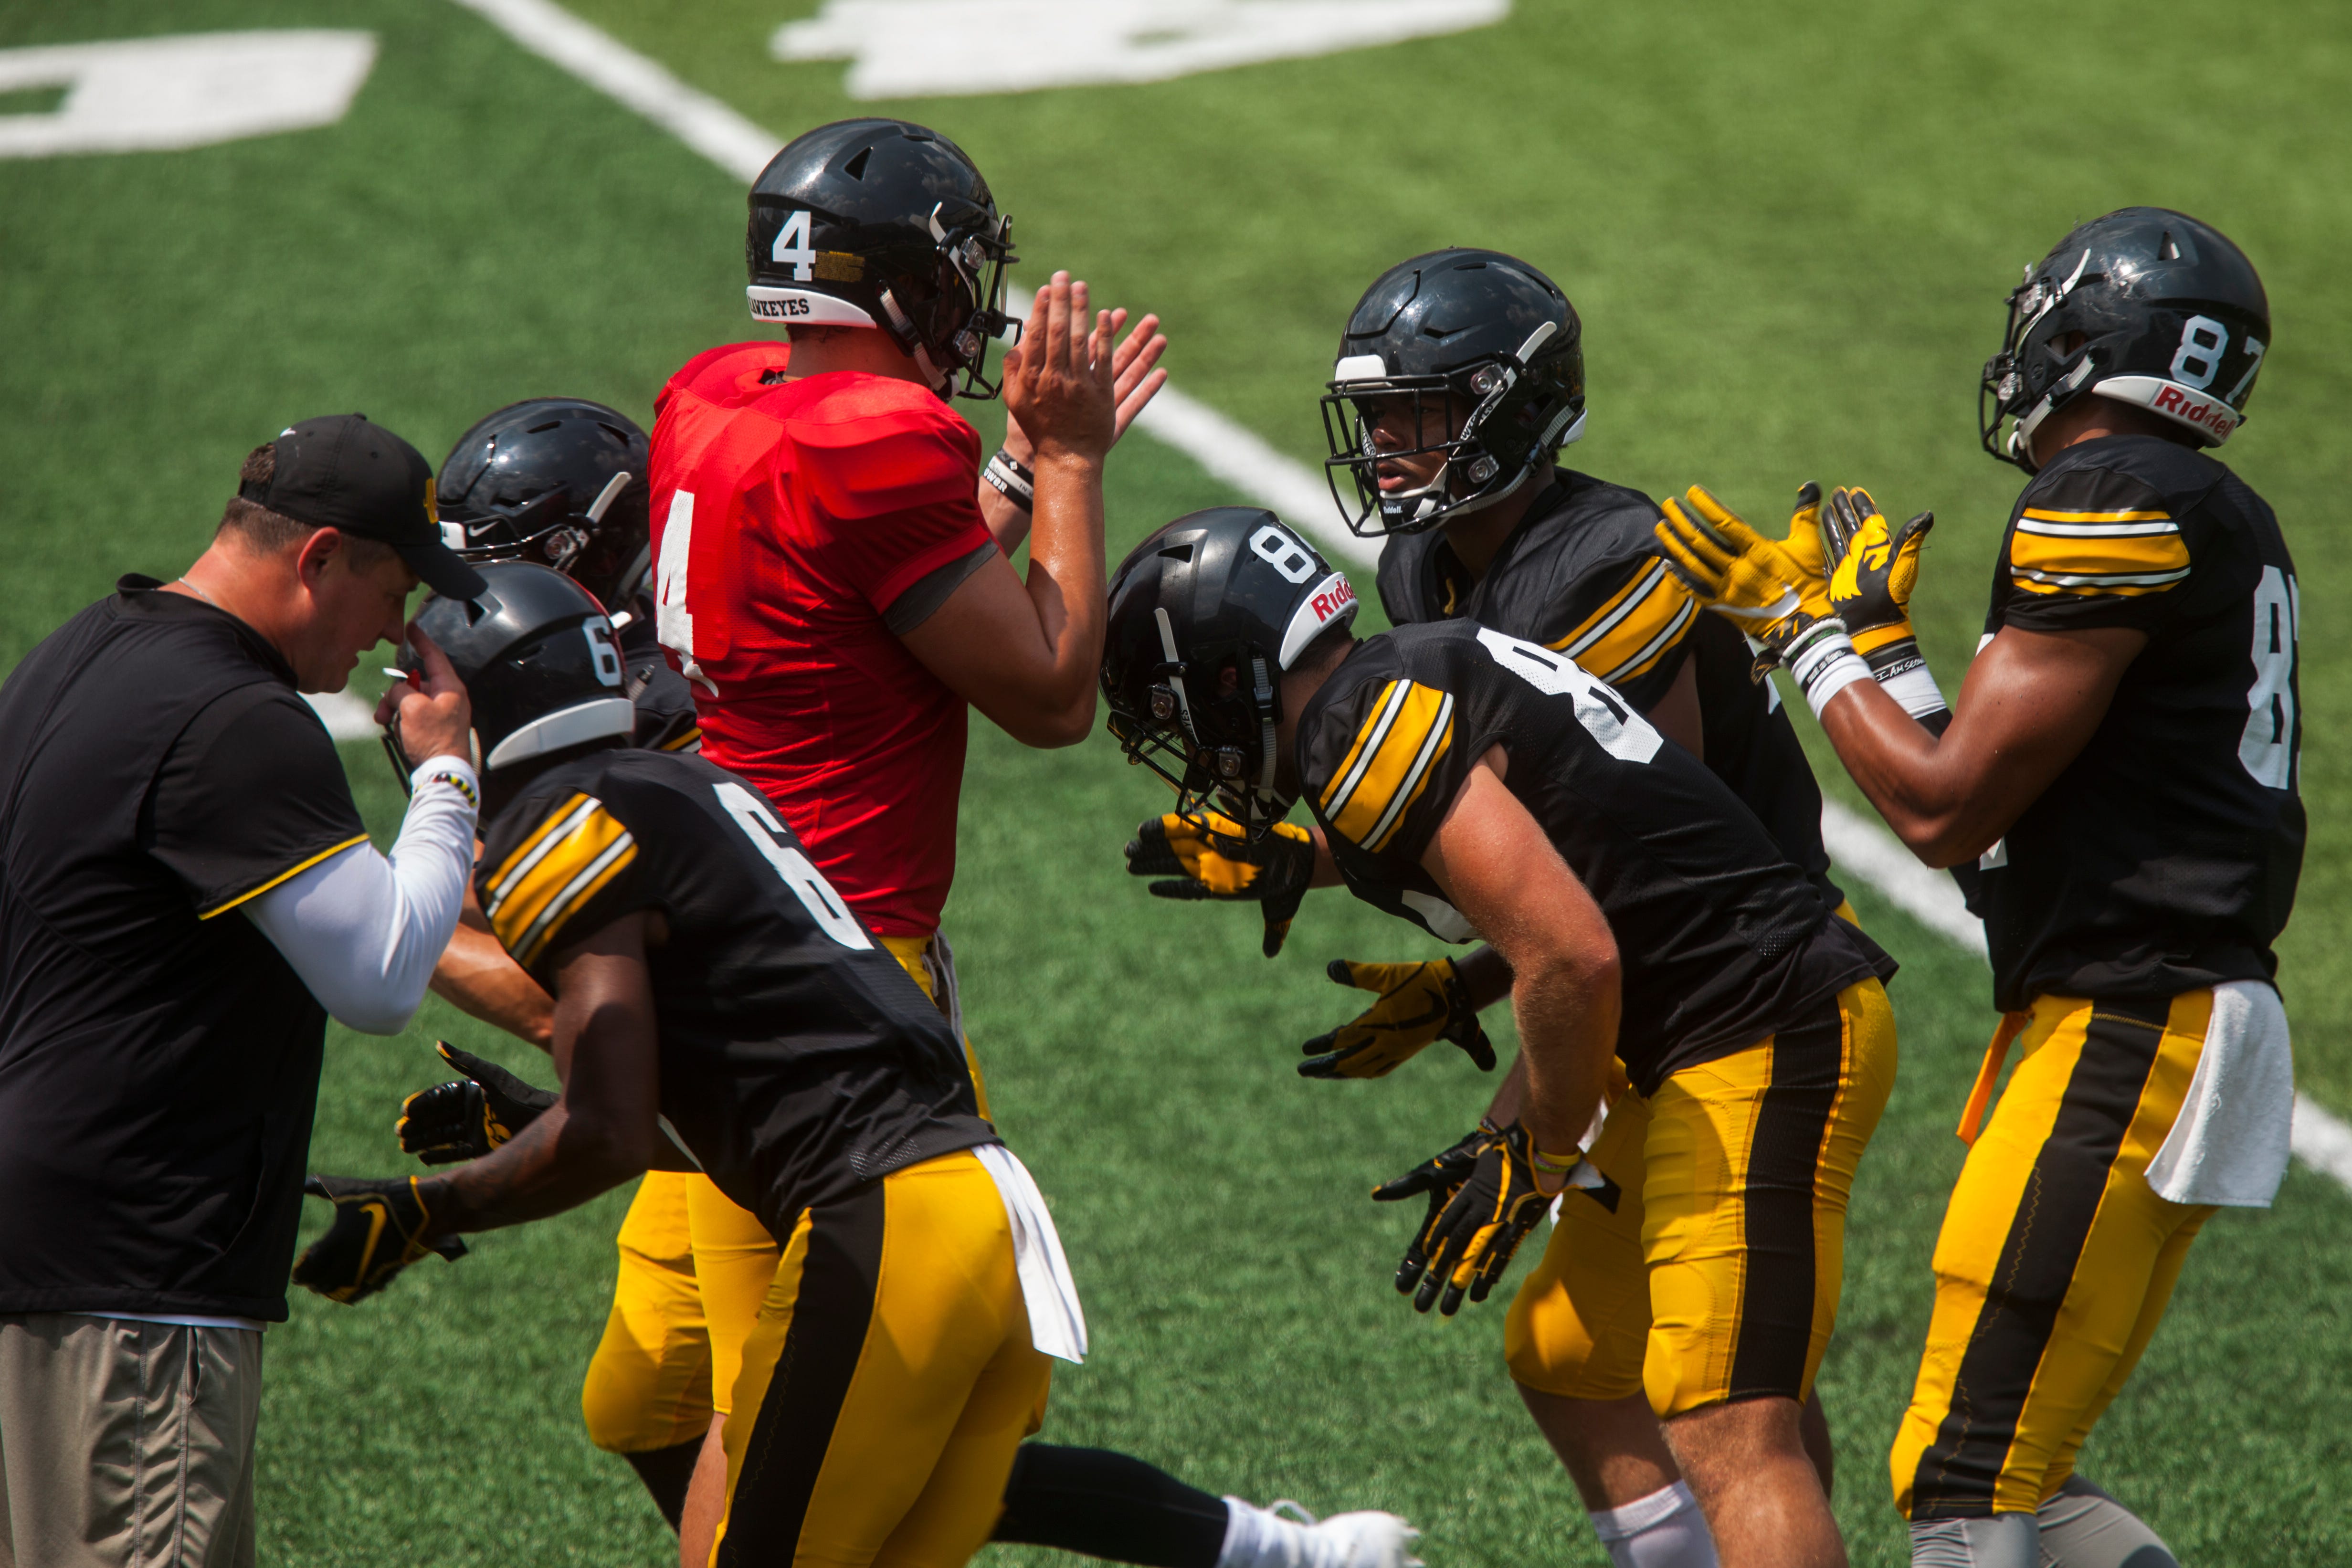 Iowa quarterback Nate Stanley heads out of the huddle after getting a call from offensive coordinator Brian Ferentz during a Kids Day practice on Saturday, Aug. 11, 2018, at Kinnick Stadium in Iowa City.